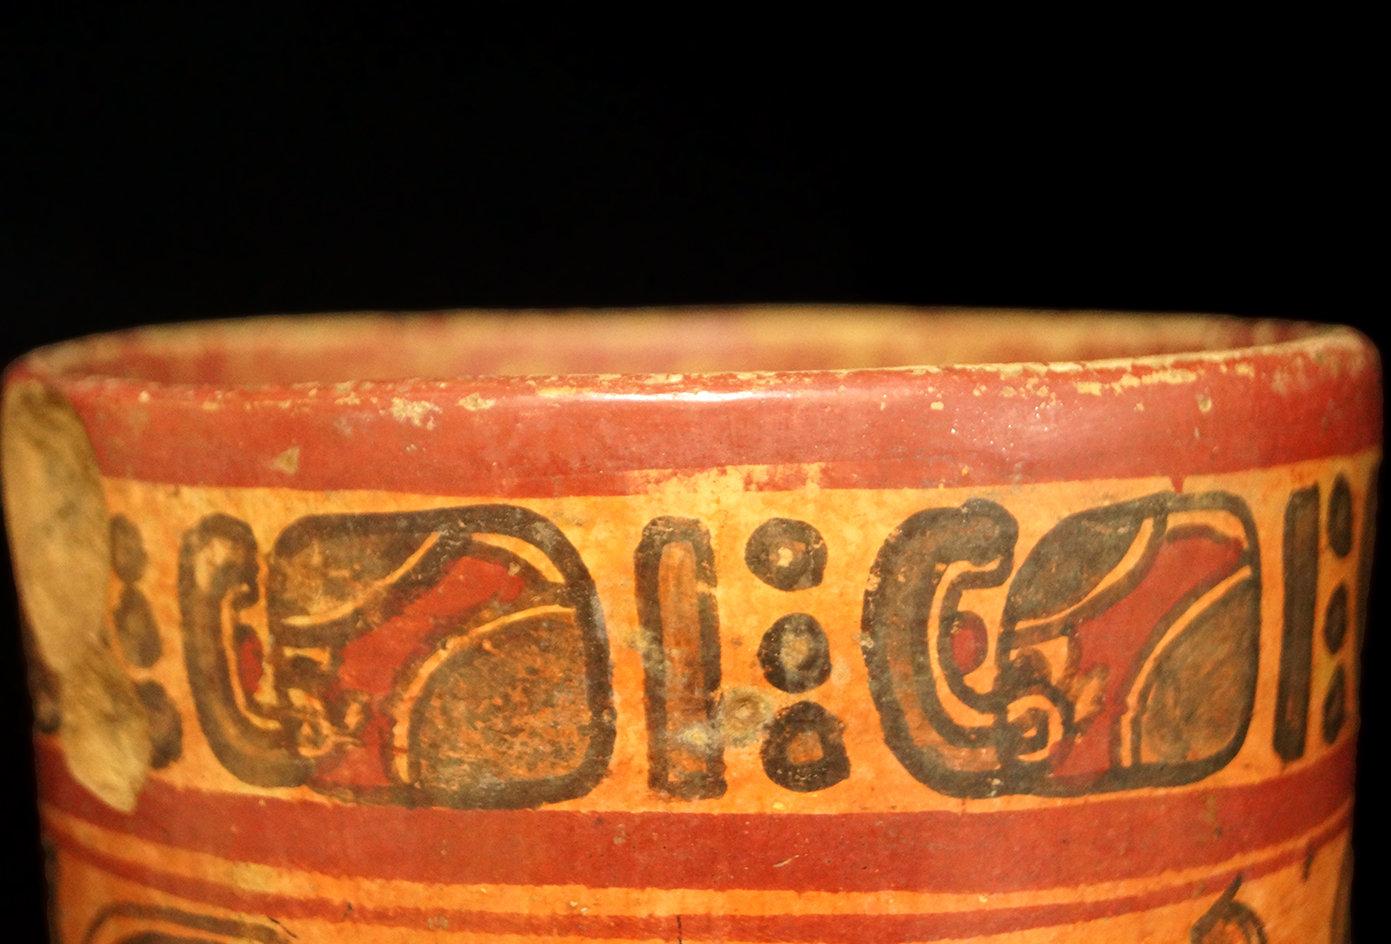 6 3/4" x 5 1/8" Polychrome Mayan Cylinder which includes Mayan number glyphs & 3 Mayan Lords.